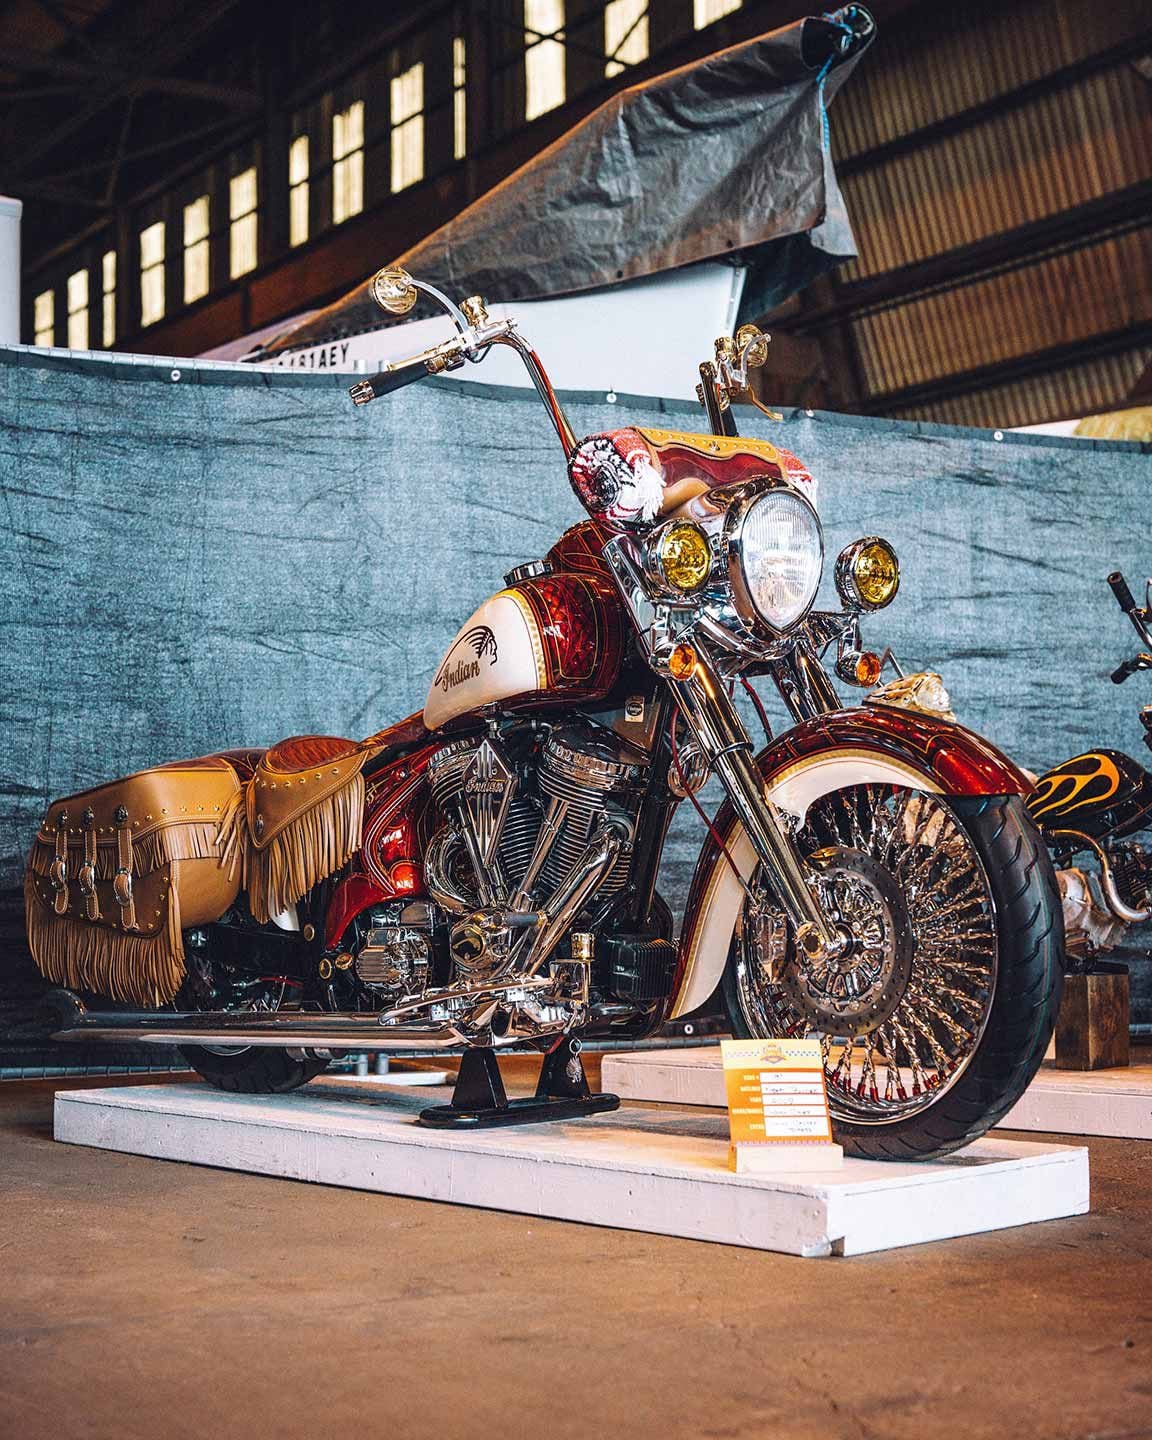 The Diamond In The Rough prize, doled out to wonderful gems “that go unnoticed” went to Robert Trottier’s very thoroughly detailed 2009 Indian Chief.